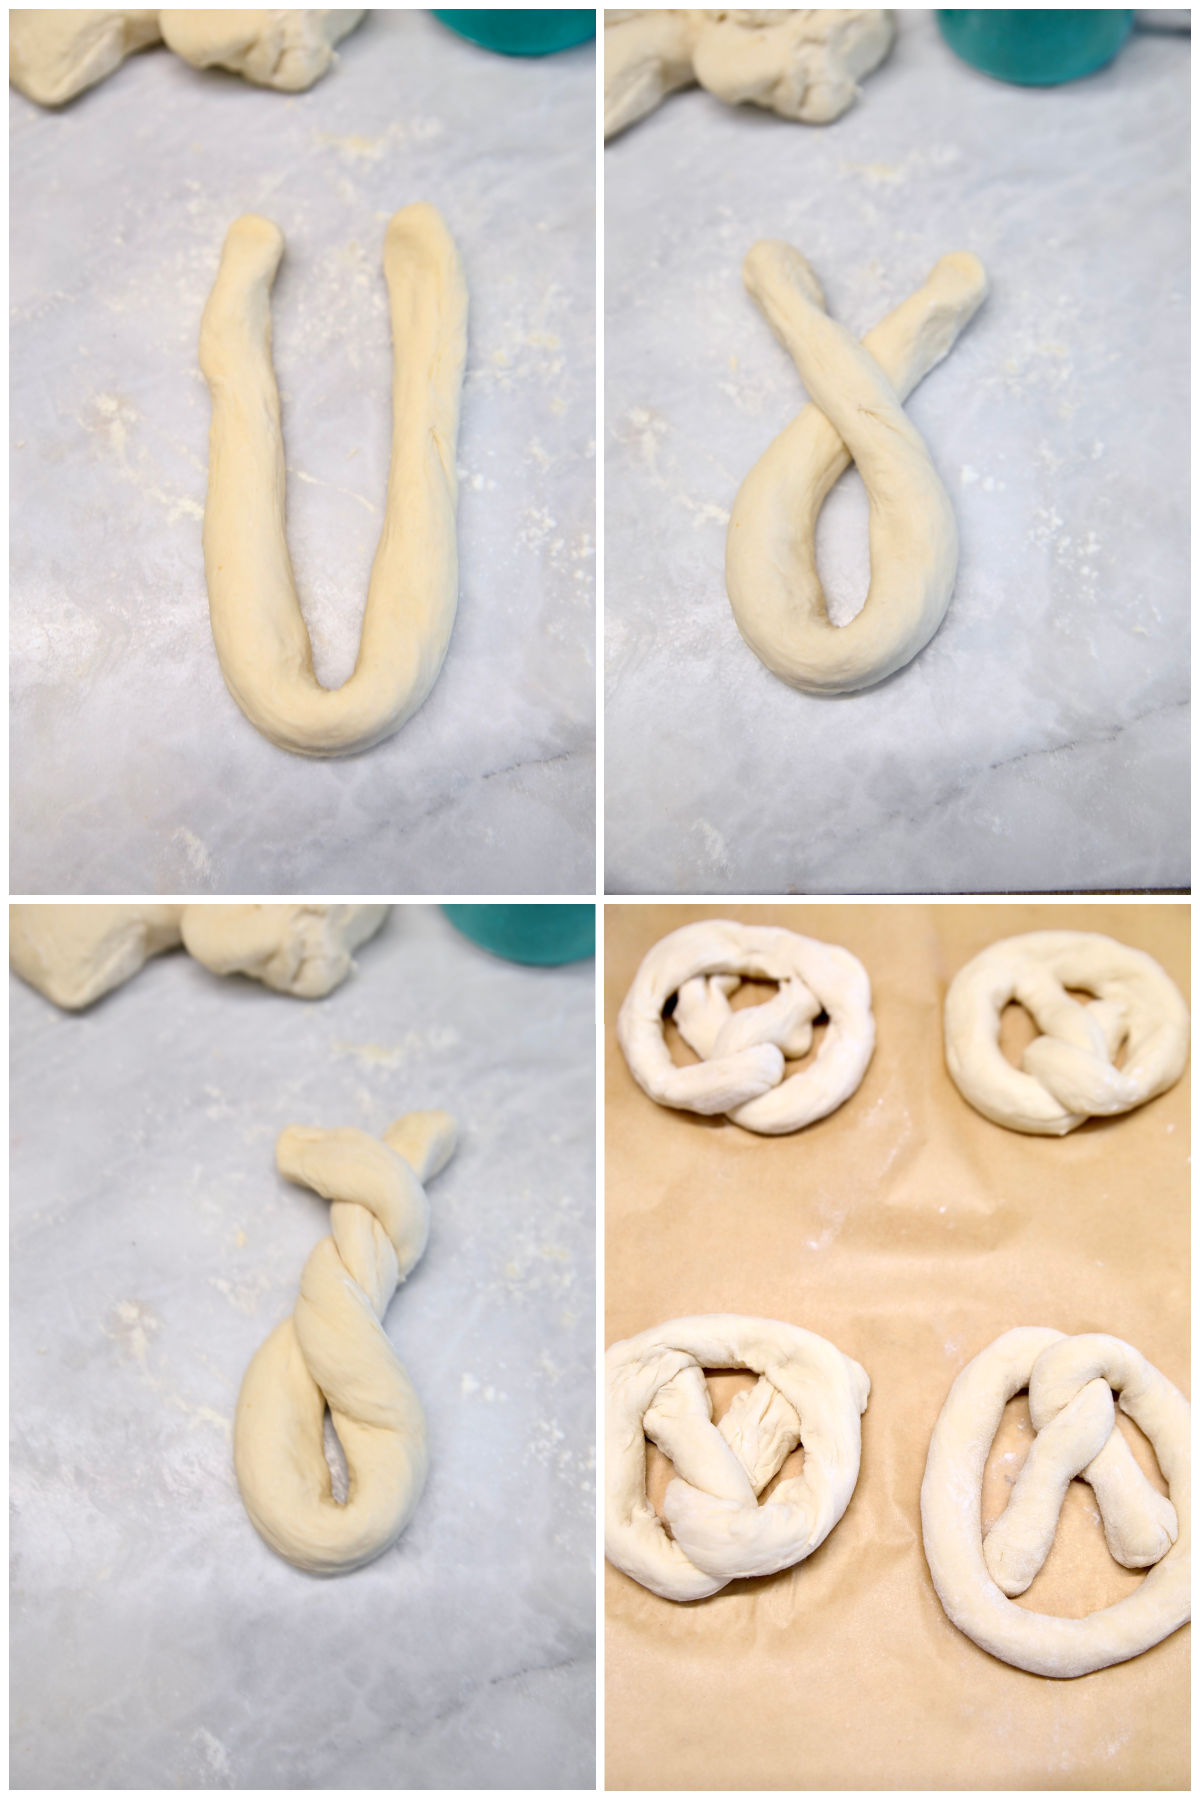 Collate shaping soft pretzels.